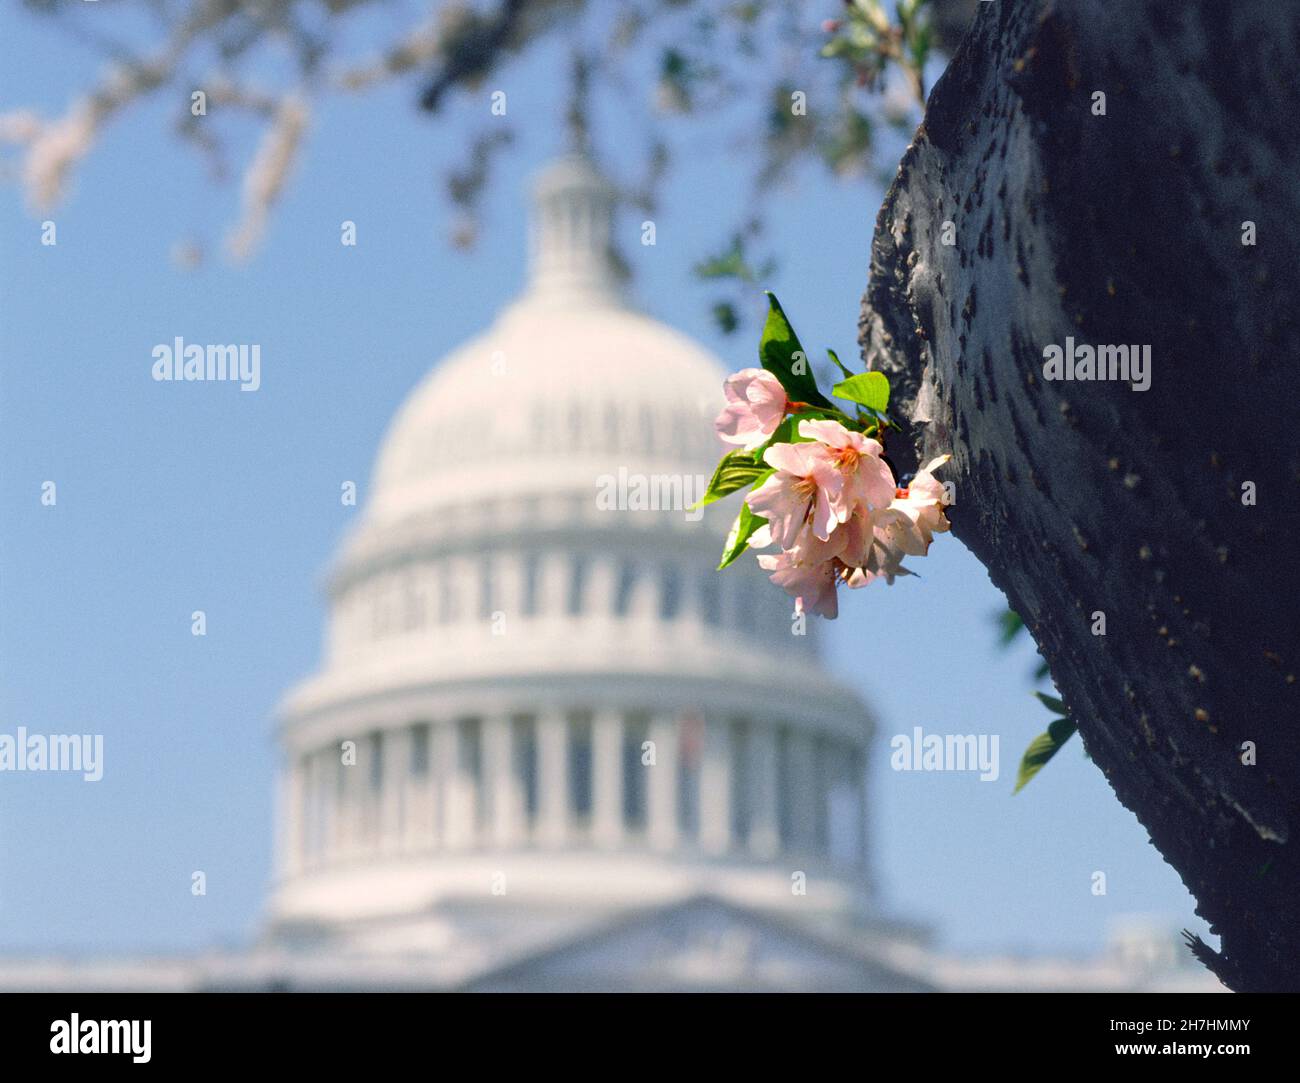 Capitol Building Washington DC cherry blossoms spring. Capitol Dome, National Mall, exterior,  American landmark on Capitol Hill. USA politics. Stock Photo